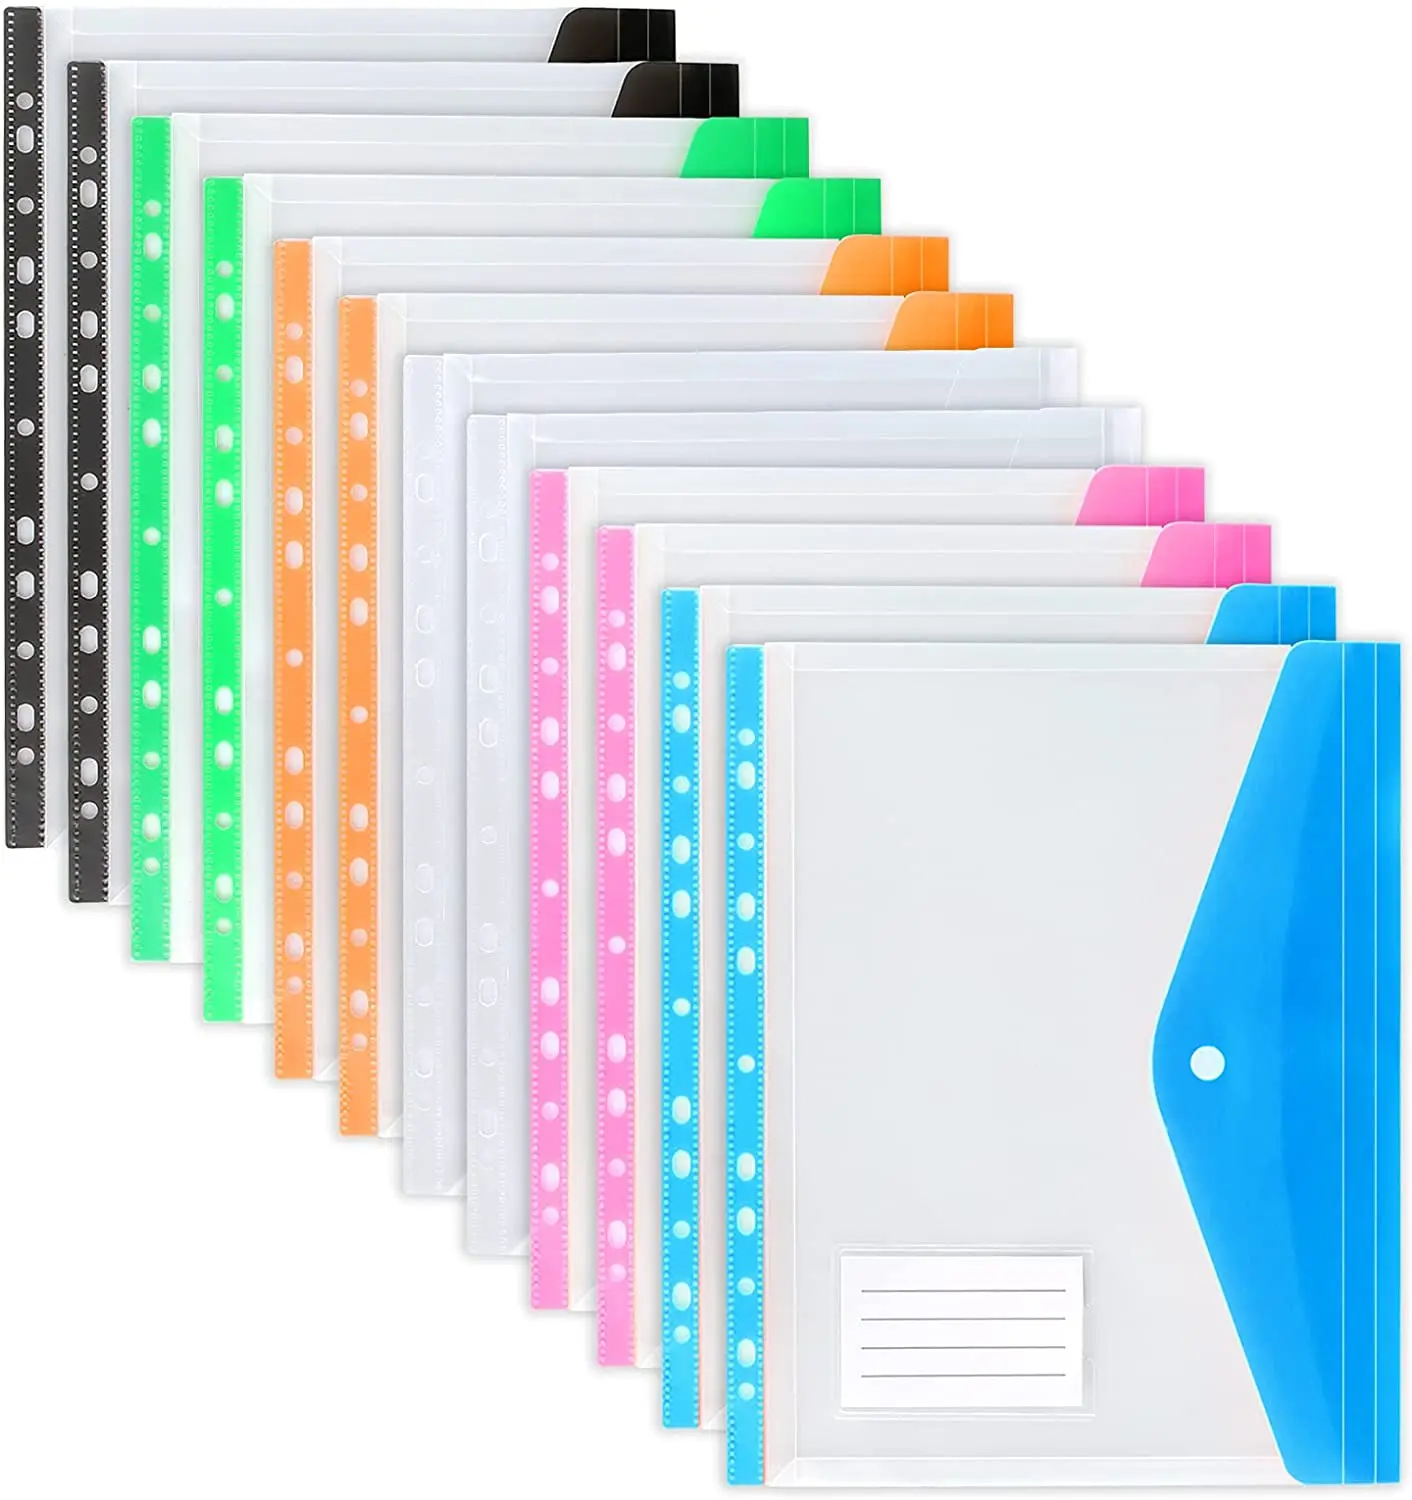 

A4 Size Plastic File Folders Wallets Colorful Document Files Envelope Bags for School Office Home, Holds 200 Plus A4 Sheets